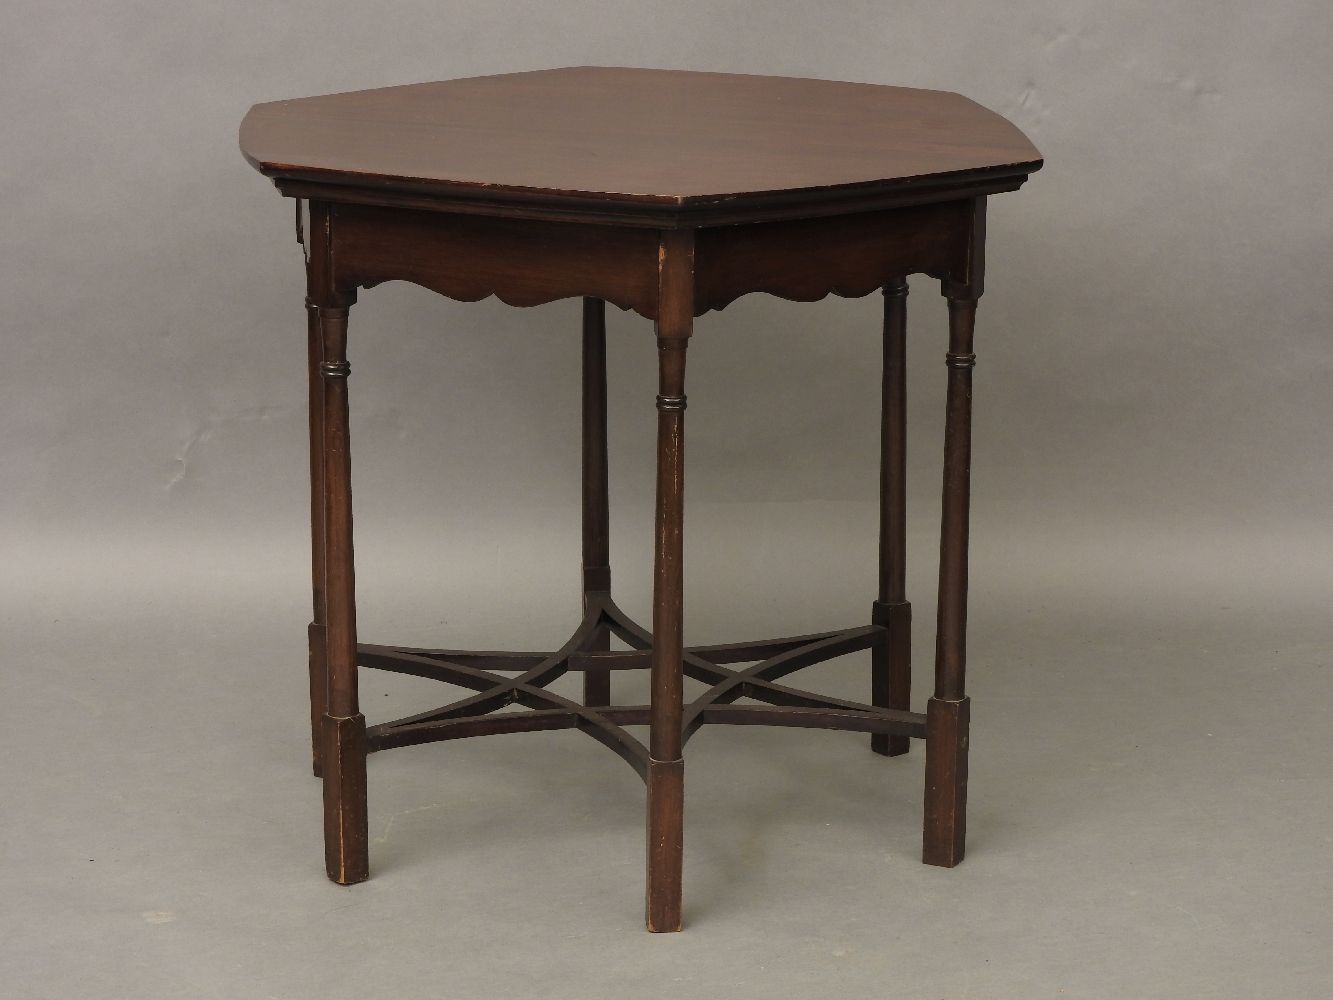 An Arts and Crafts style octagonal centre table